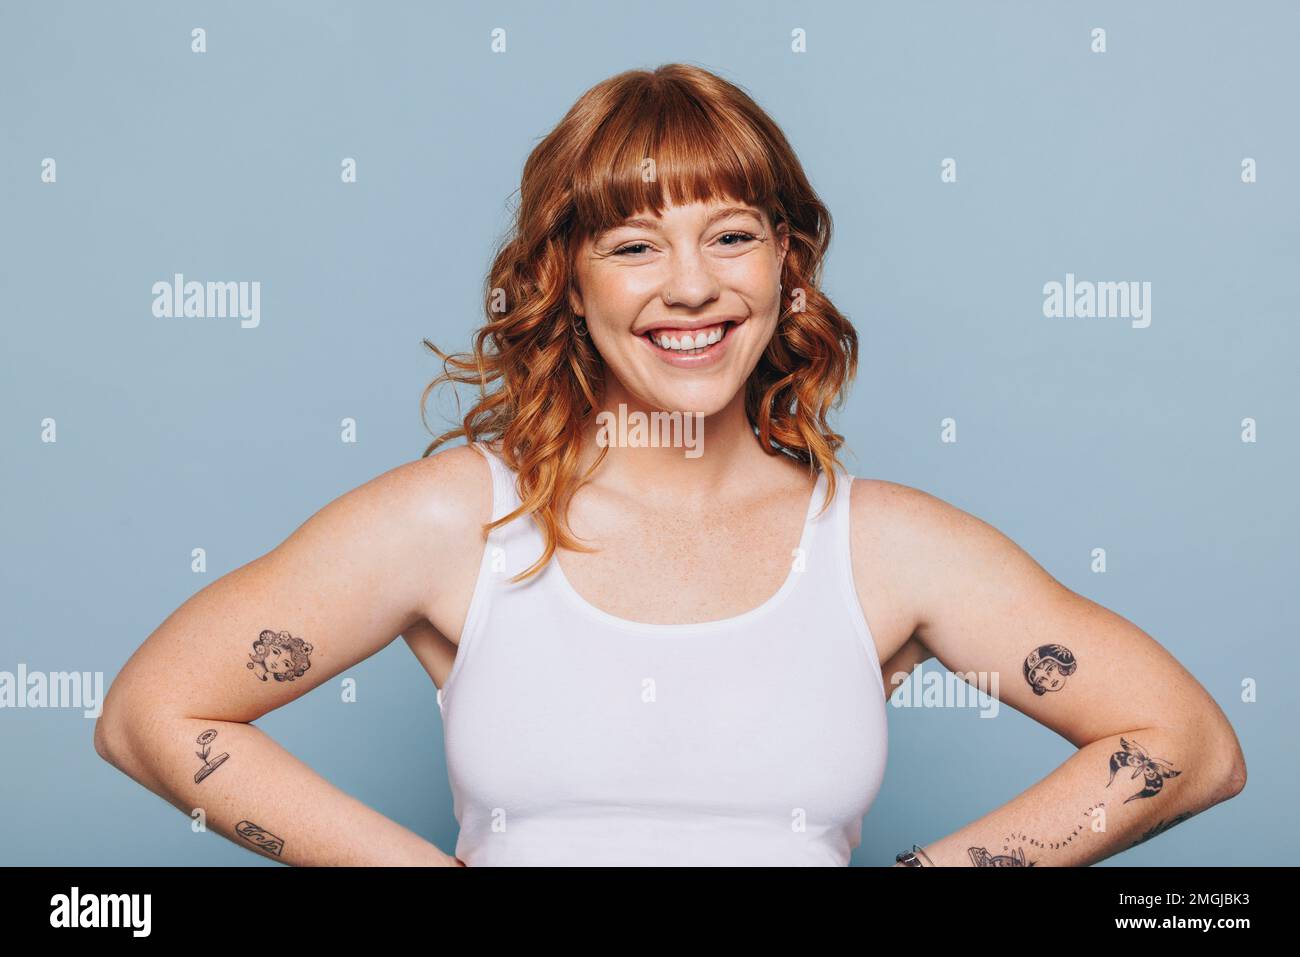 Portrait of a happy young woman with arm tattoos standing in a studio. Cheerful young woman with ginger hair standing against a blue background in a w Stock Photo